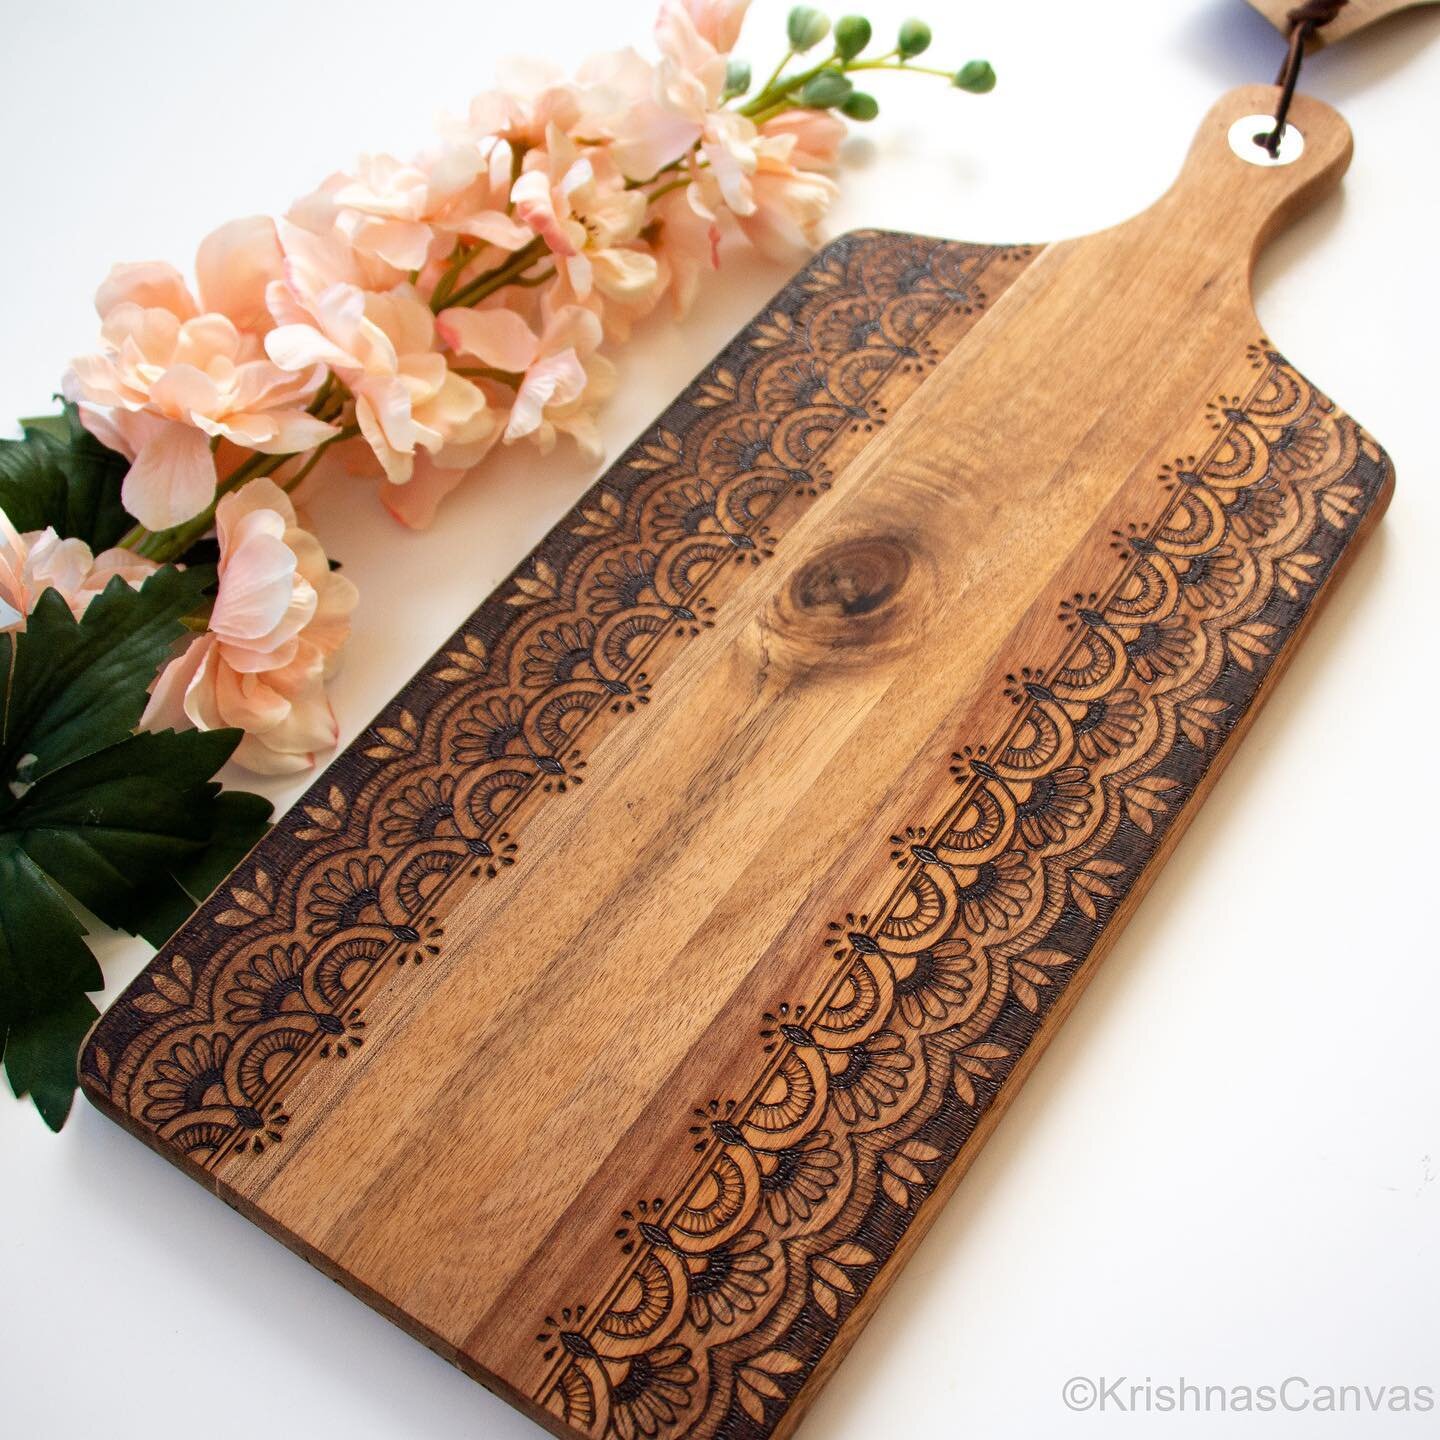 Henna inspired cutting/serving board available in my shop now! All ready-made wood products are 10% off right now with the discount code &ldquo;BLACKFRIDAY10&rdquo; 

All my boards are food-safe and finished with mineral oil so they are ready to be u